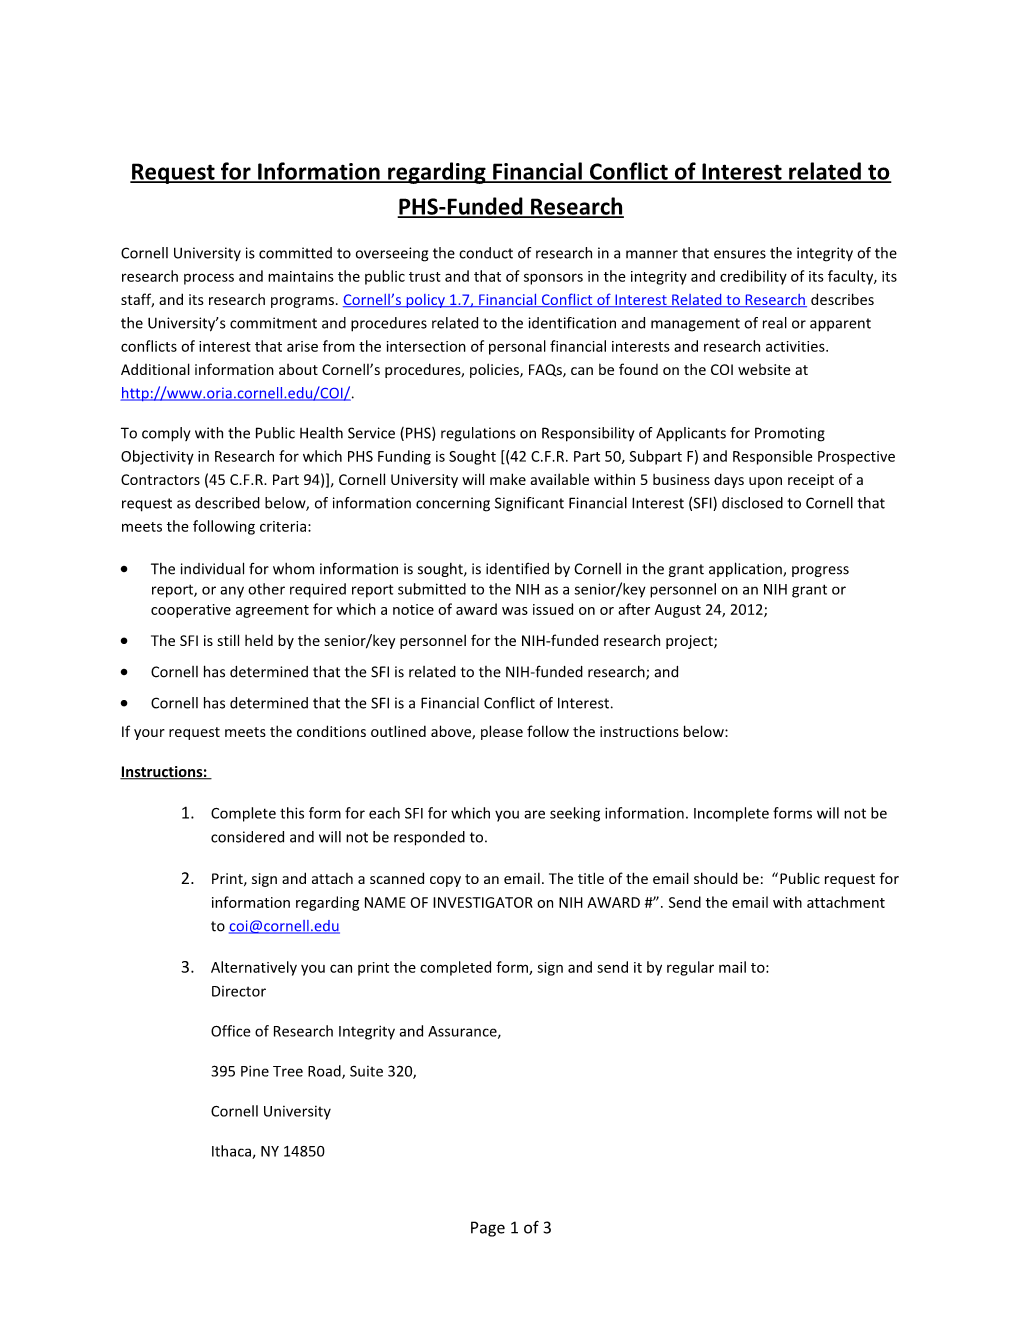 Request for Information Regarding Financial Conflict of Interest Related to PHS-Funded